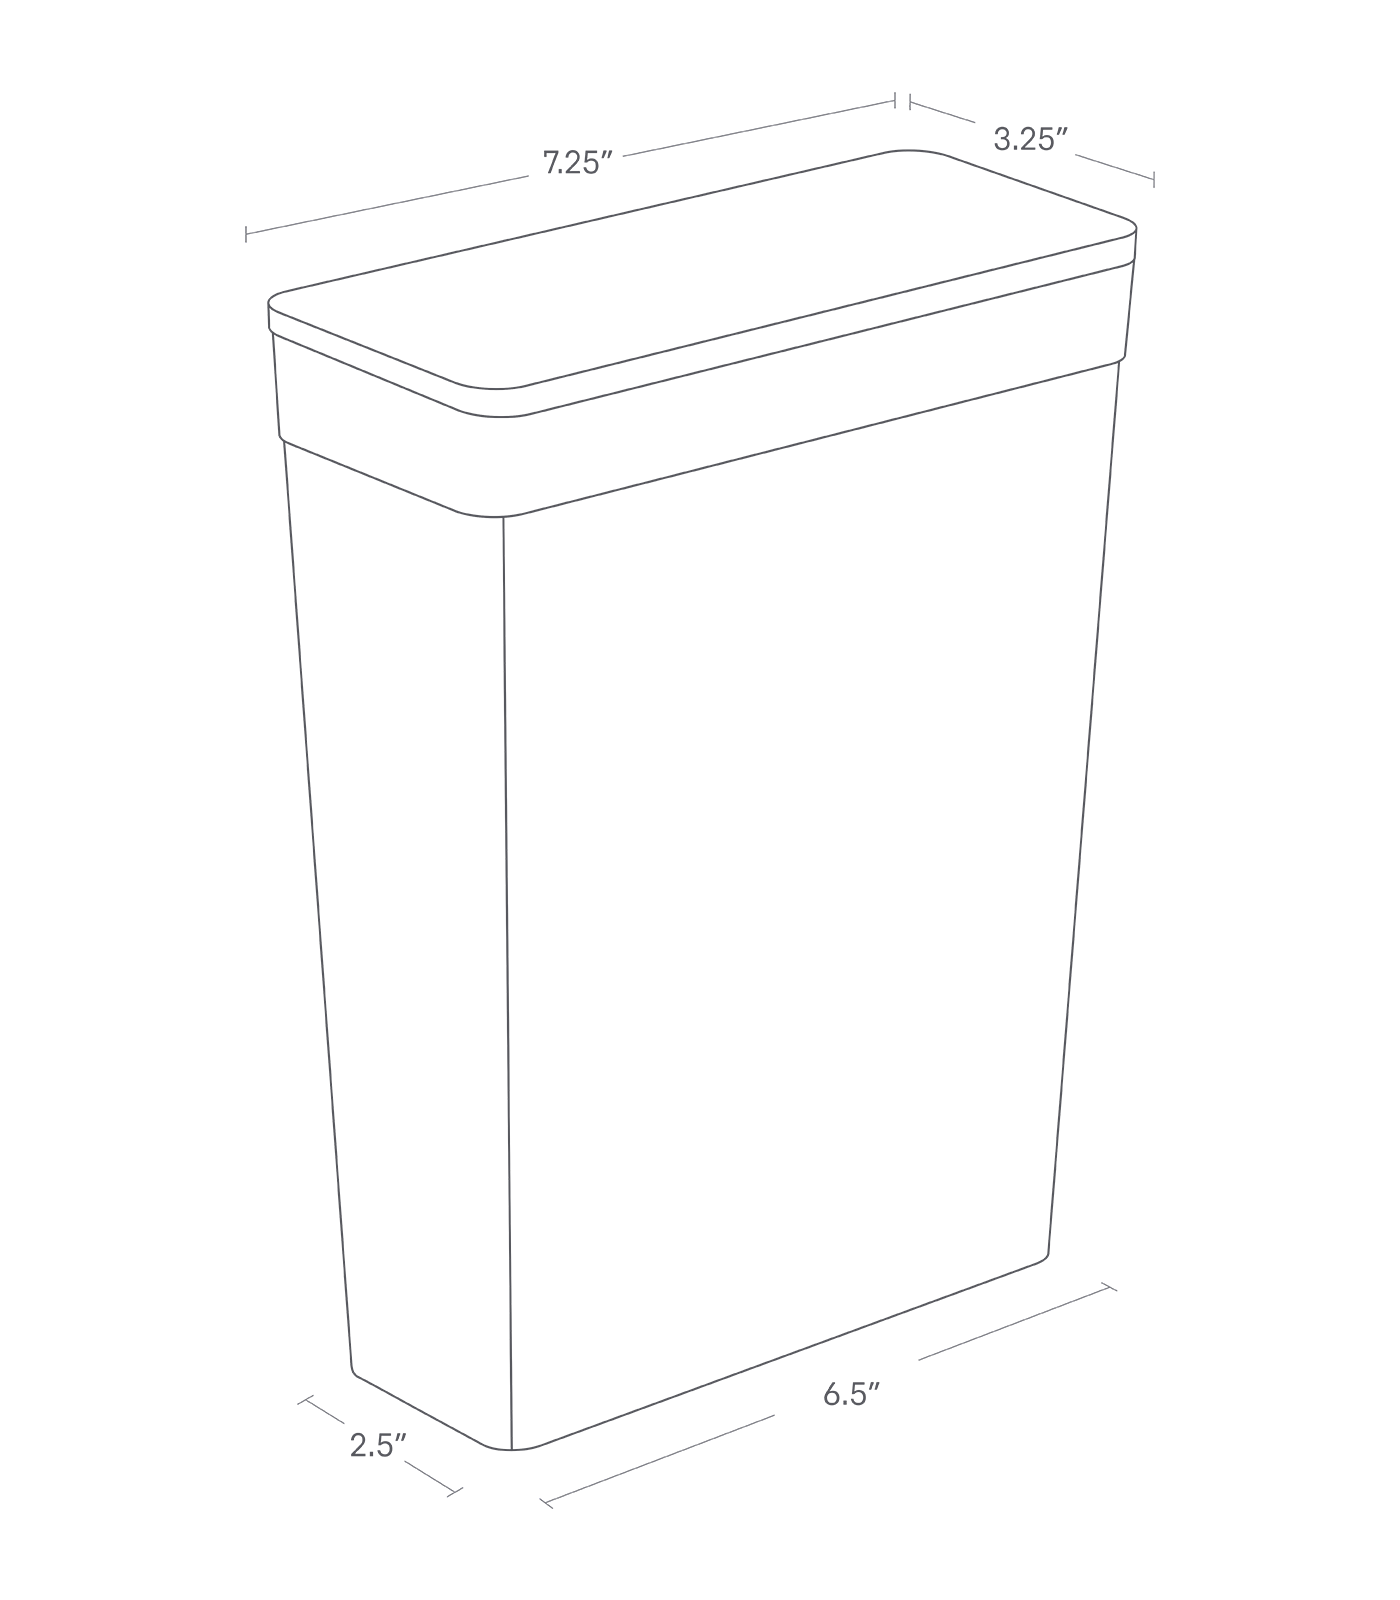 Dimenision image for Food Storage Containeron a white background showing total width of 7.25